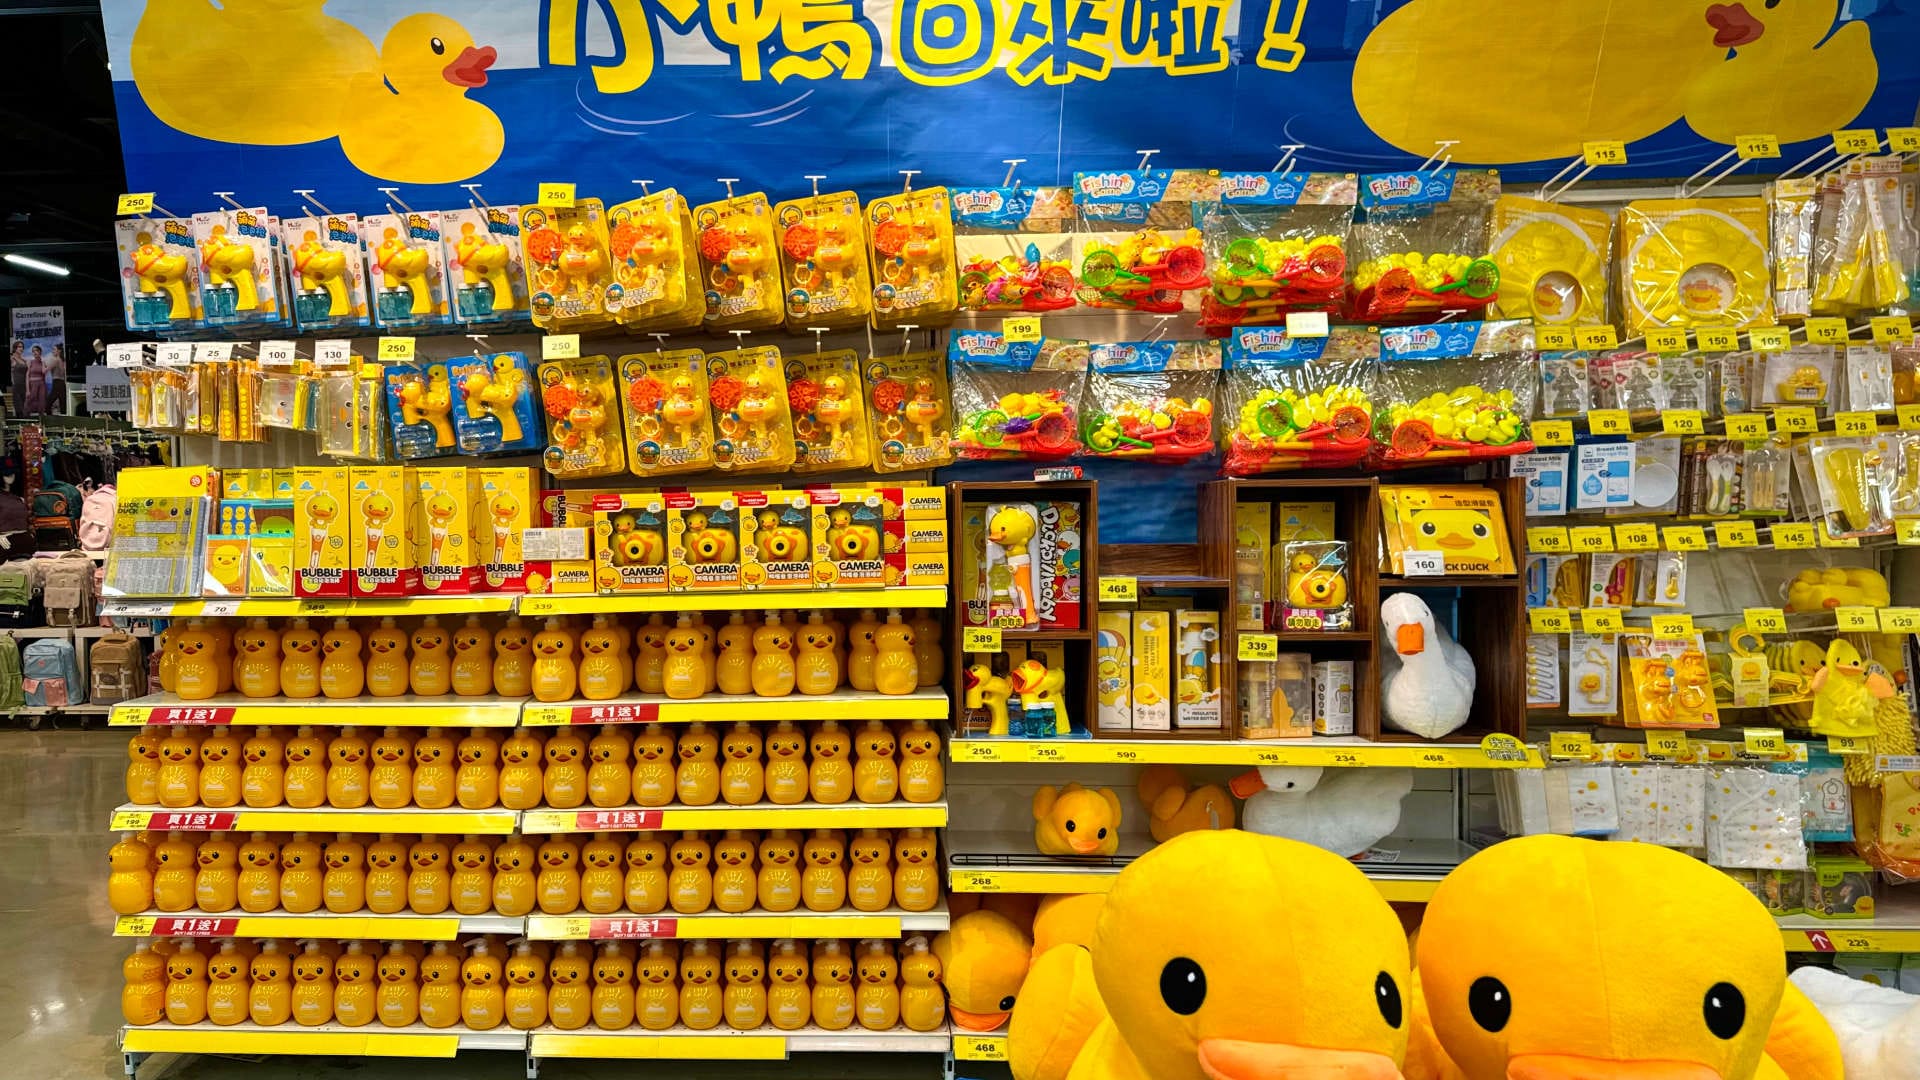 Supermarket shelves covered in yellow duck-themed items, such as liquid soap dispensers, bubble machines, cameras, rubber slippers, and carry bags.